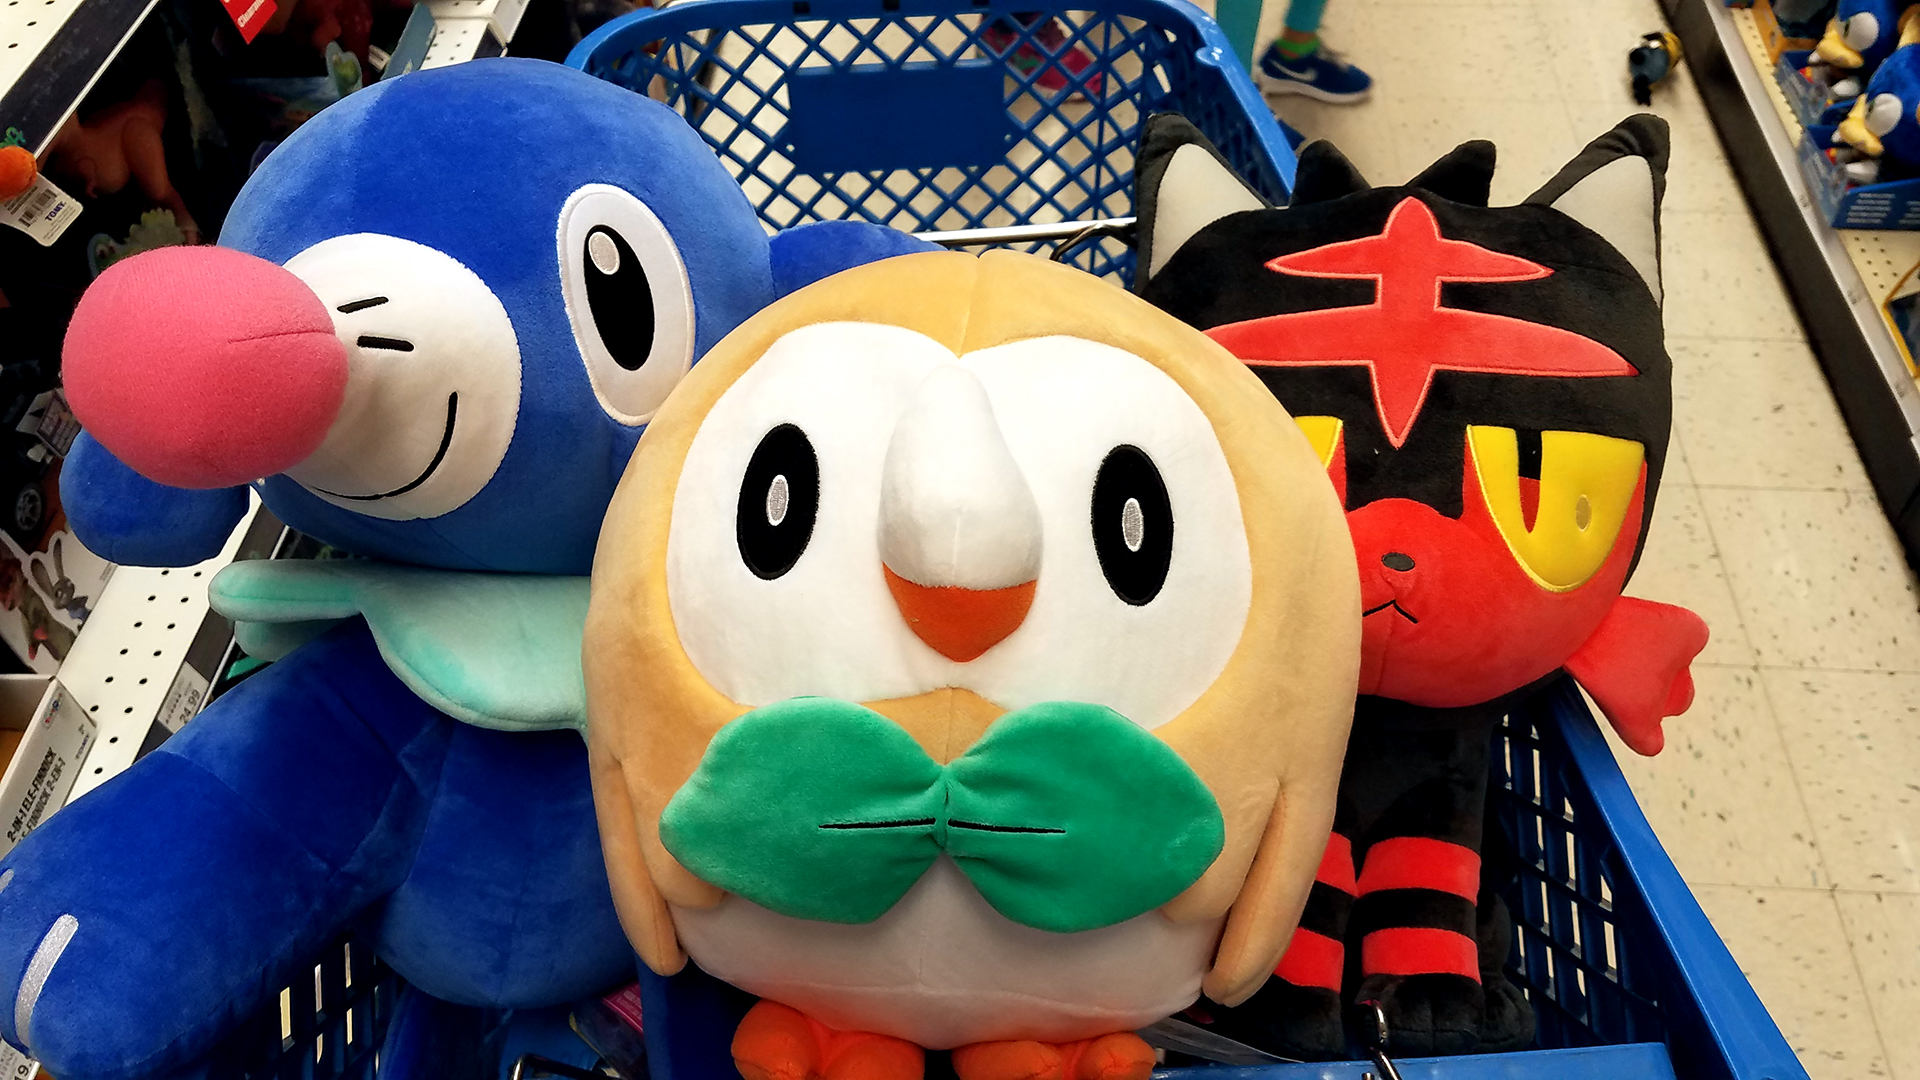 Plush Pokemon Should Not Be $80 And Make Me Cry